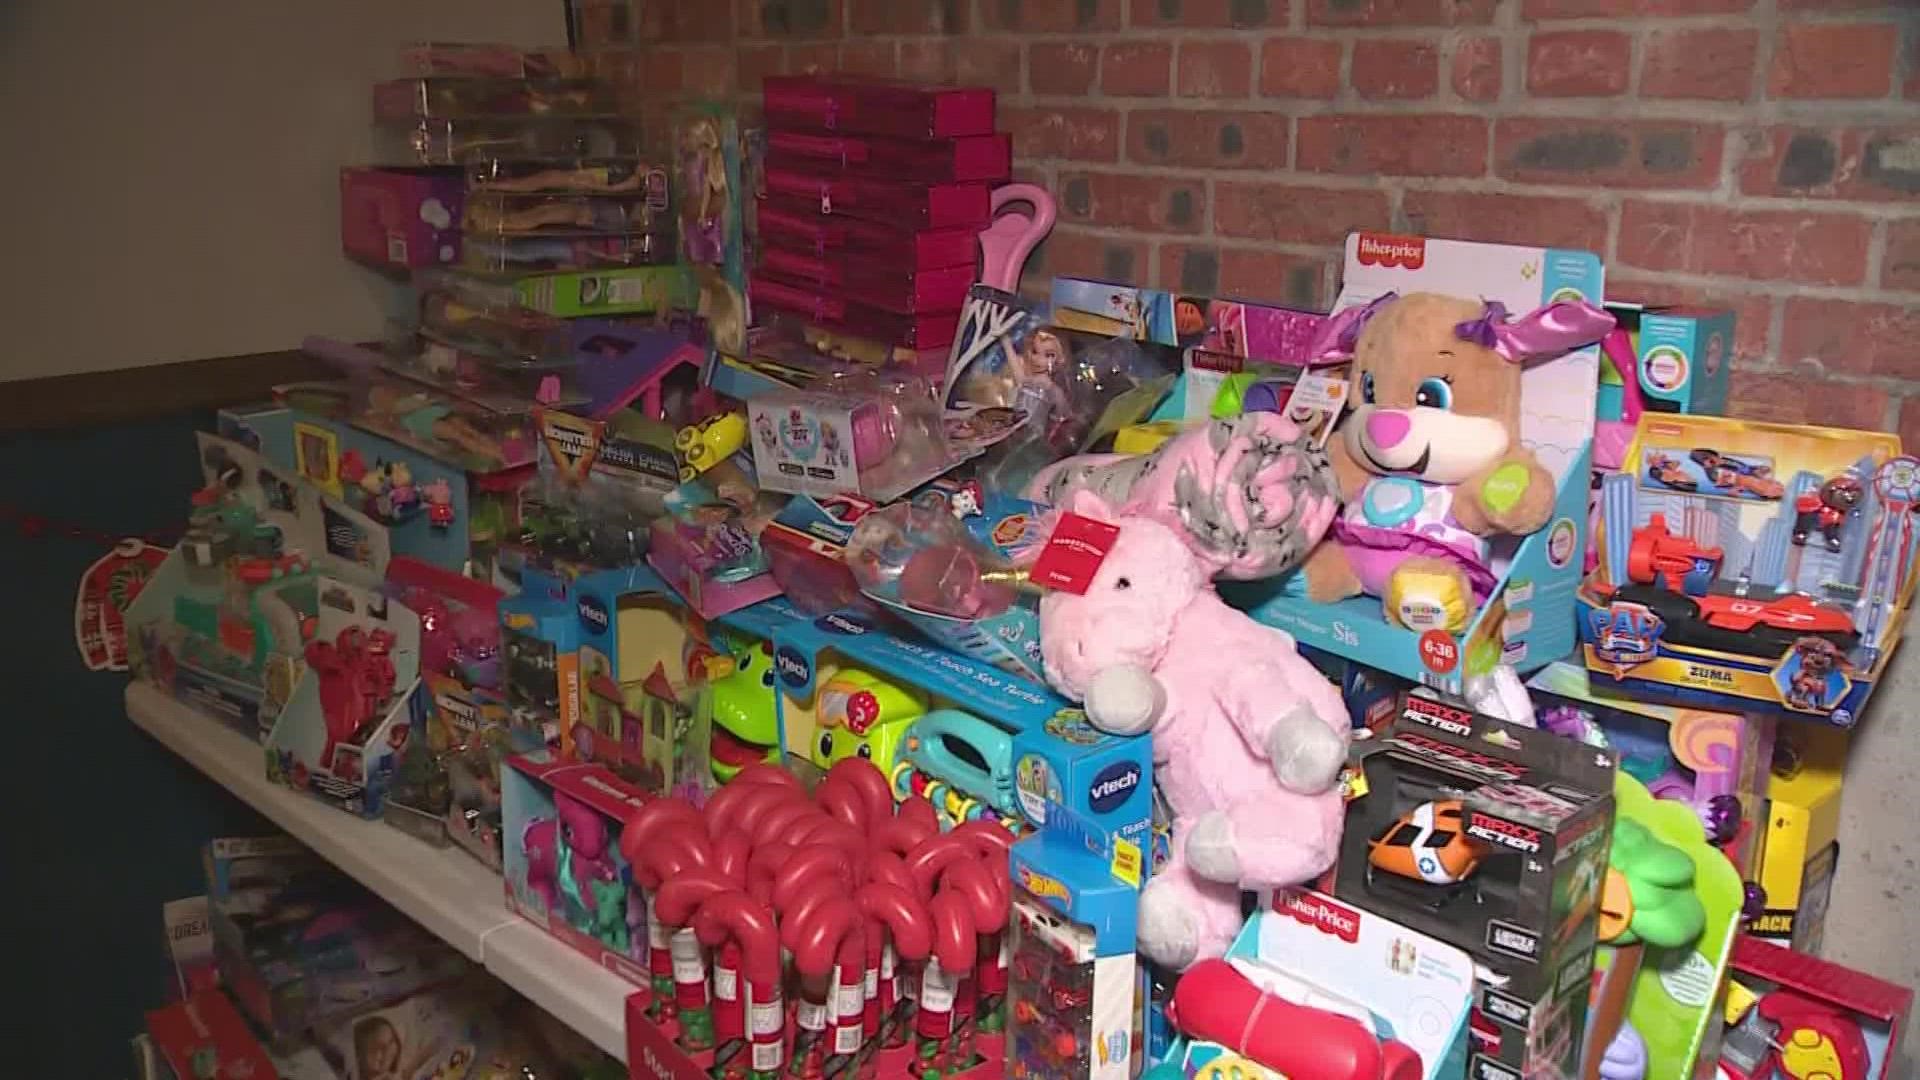 A few days before a local non-profit was set to pass out hundreds of toys to Houston kids in need, someone broke into a business and stole them.